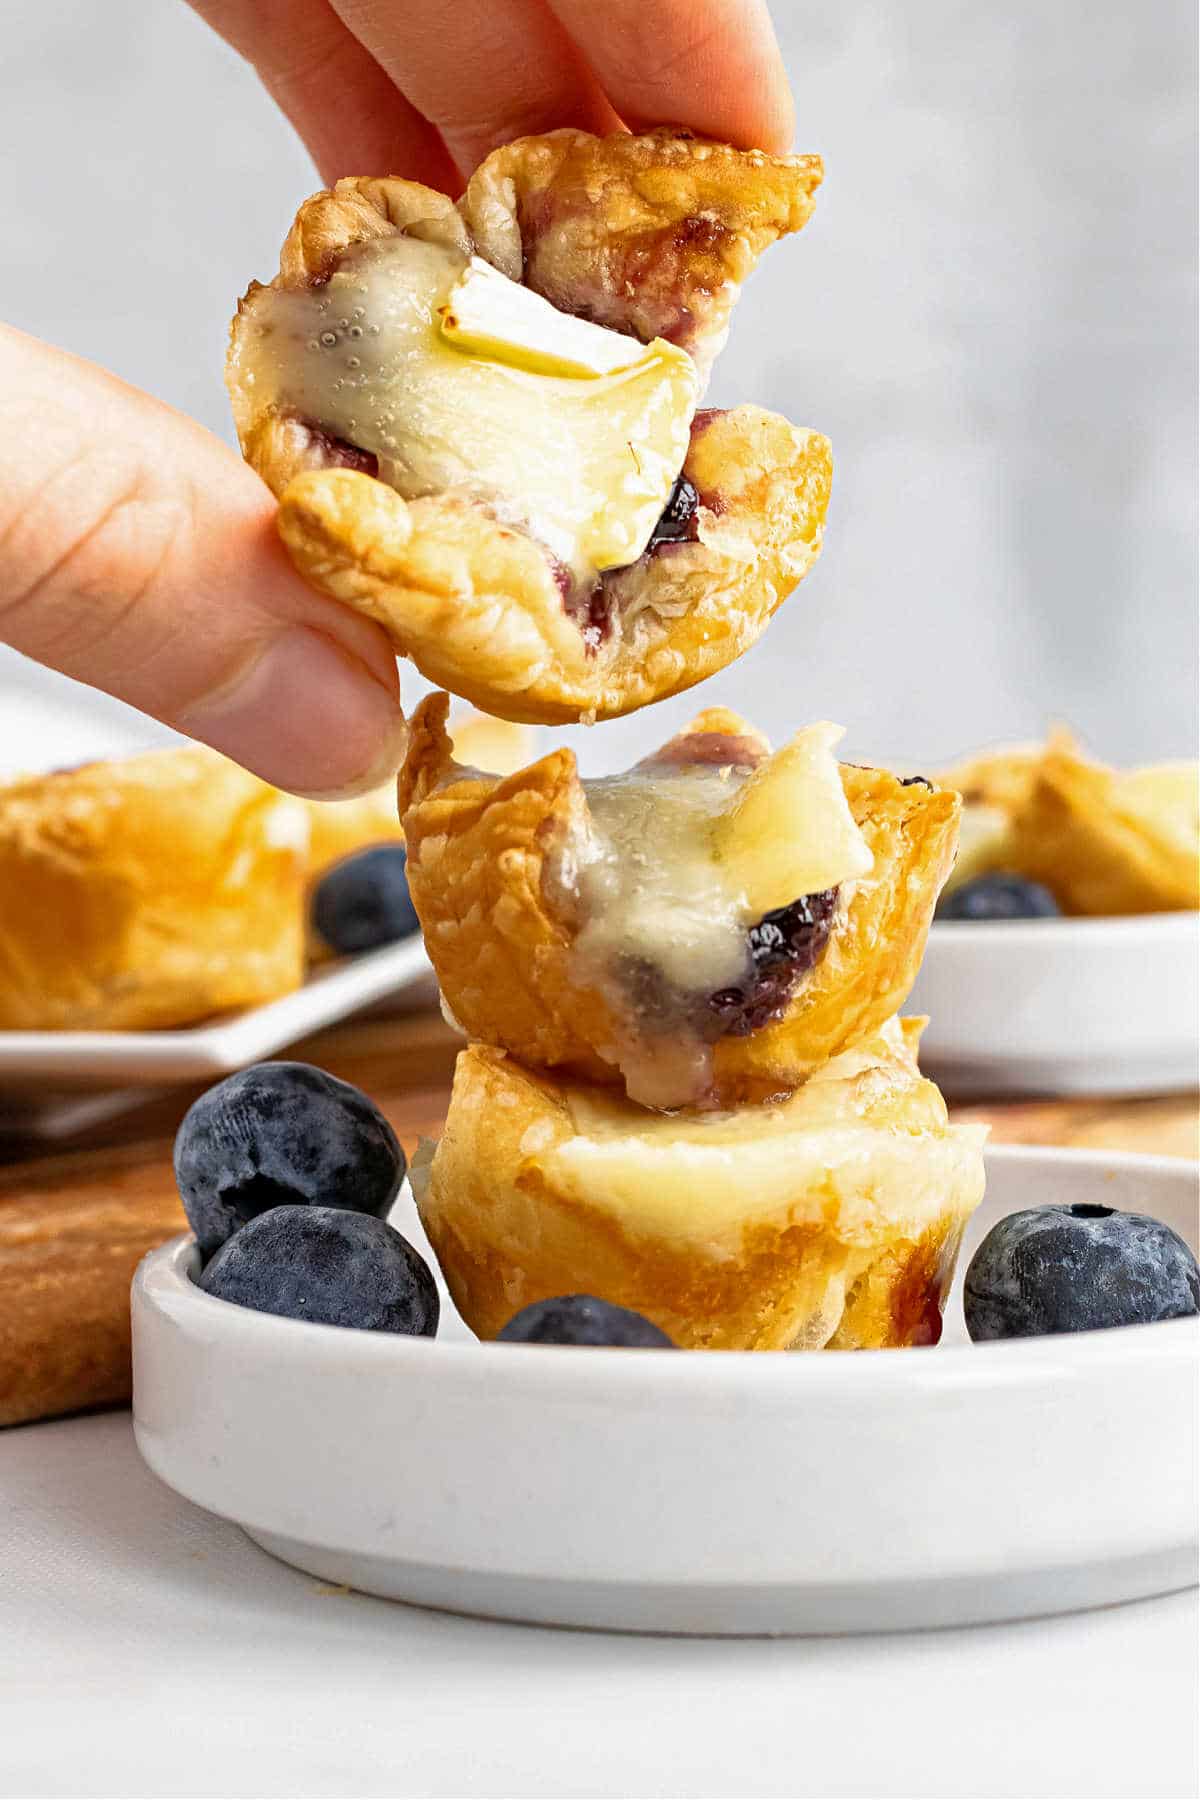 stacked baked brie puffs on small white plate. A hand is taking the one off the top.